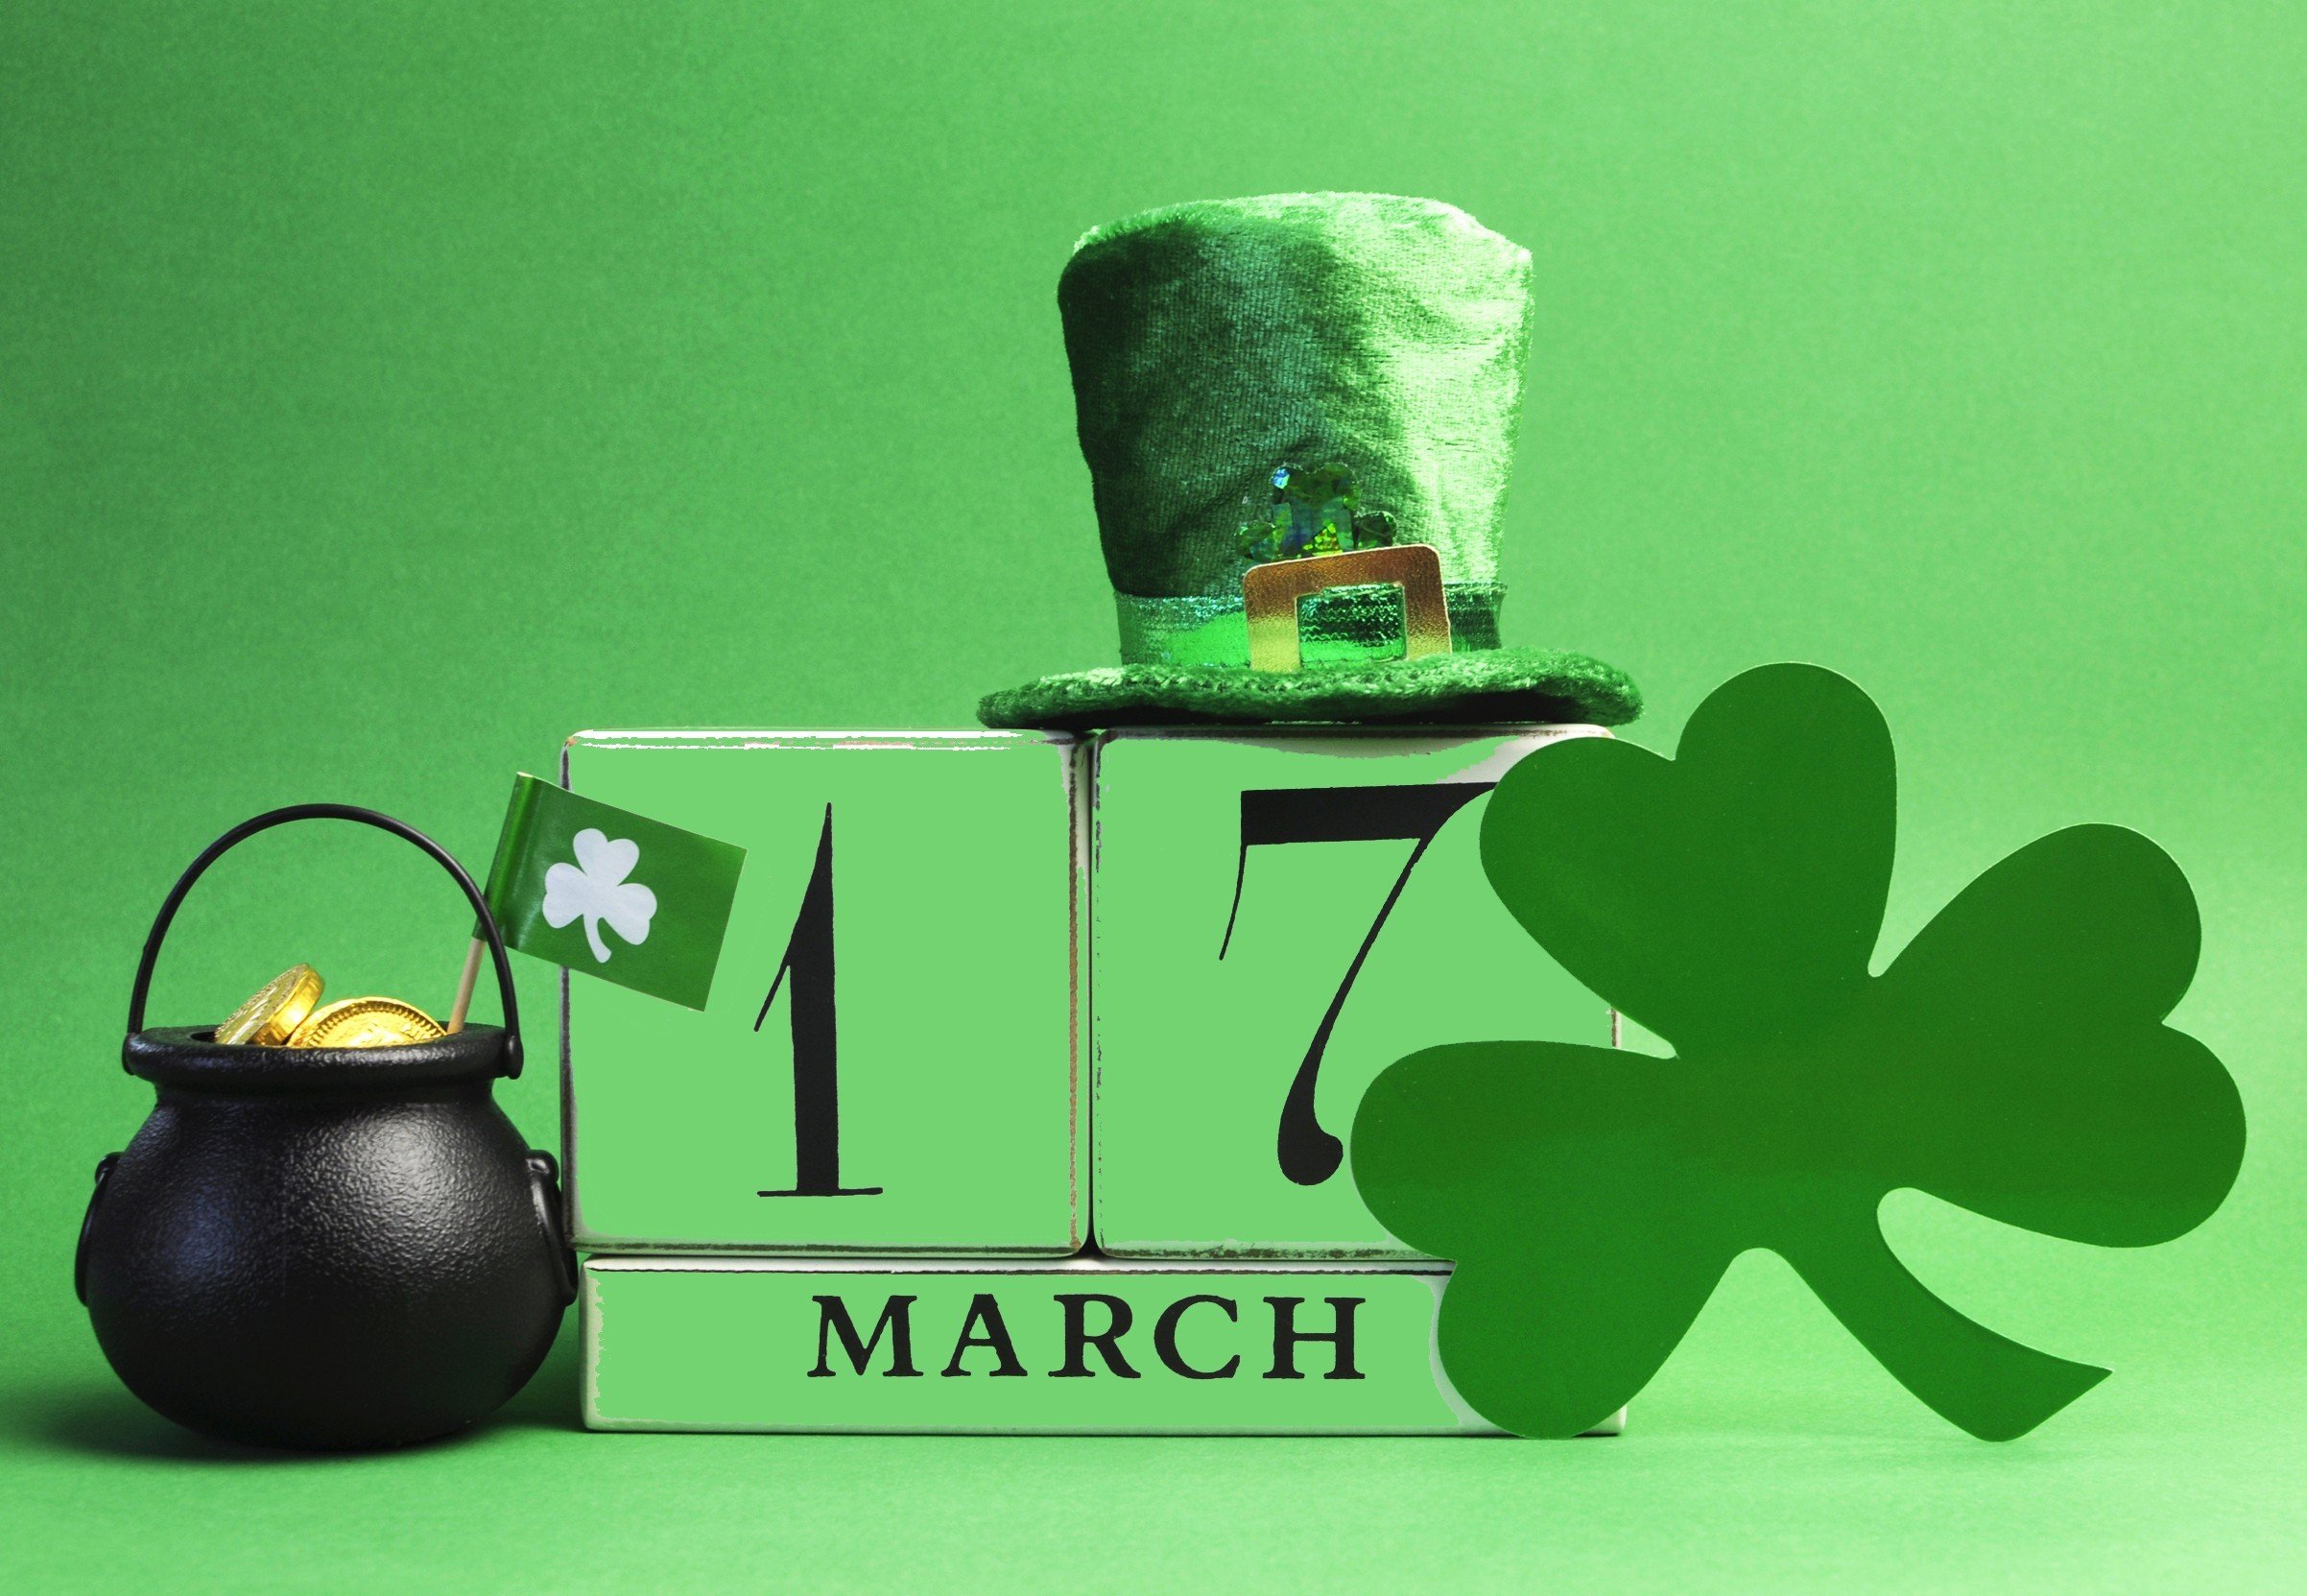 Free download St Patrick Day Backgrounds 47 image 2404x1663 for your Deskto...